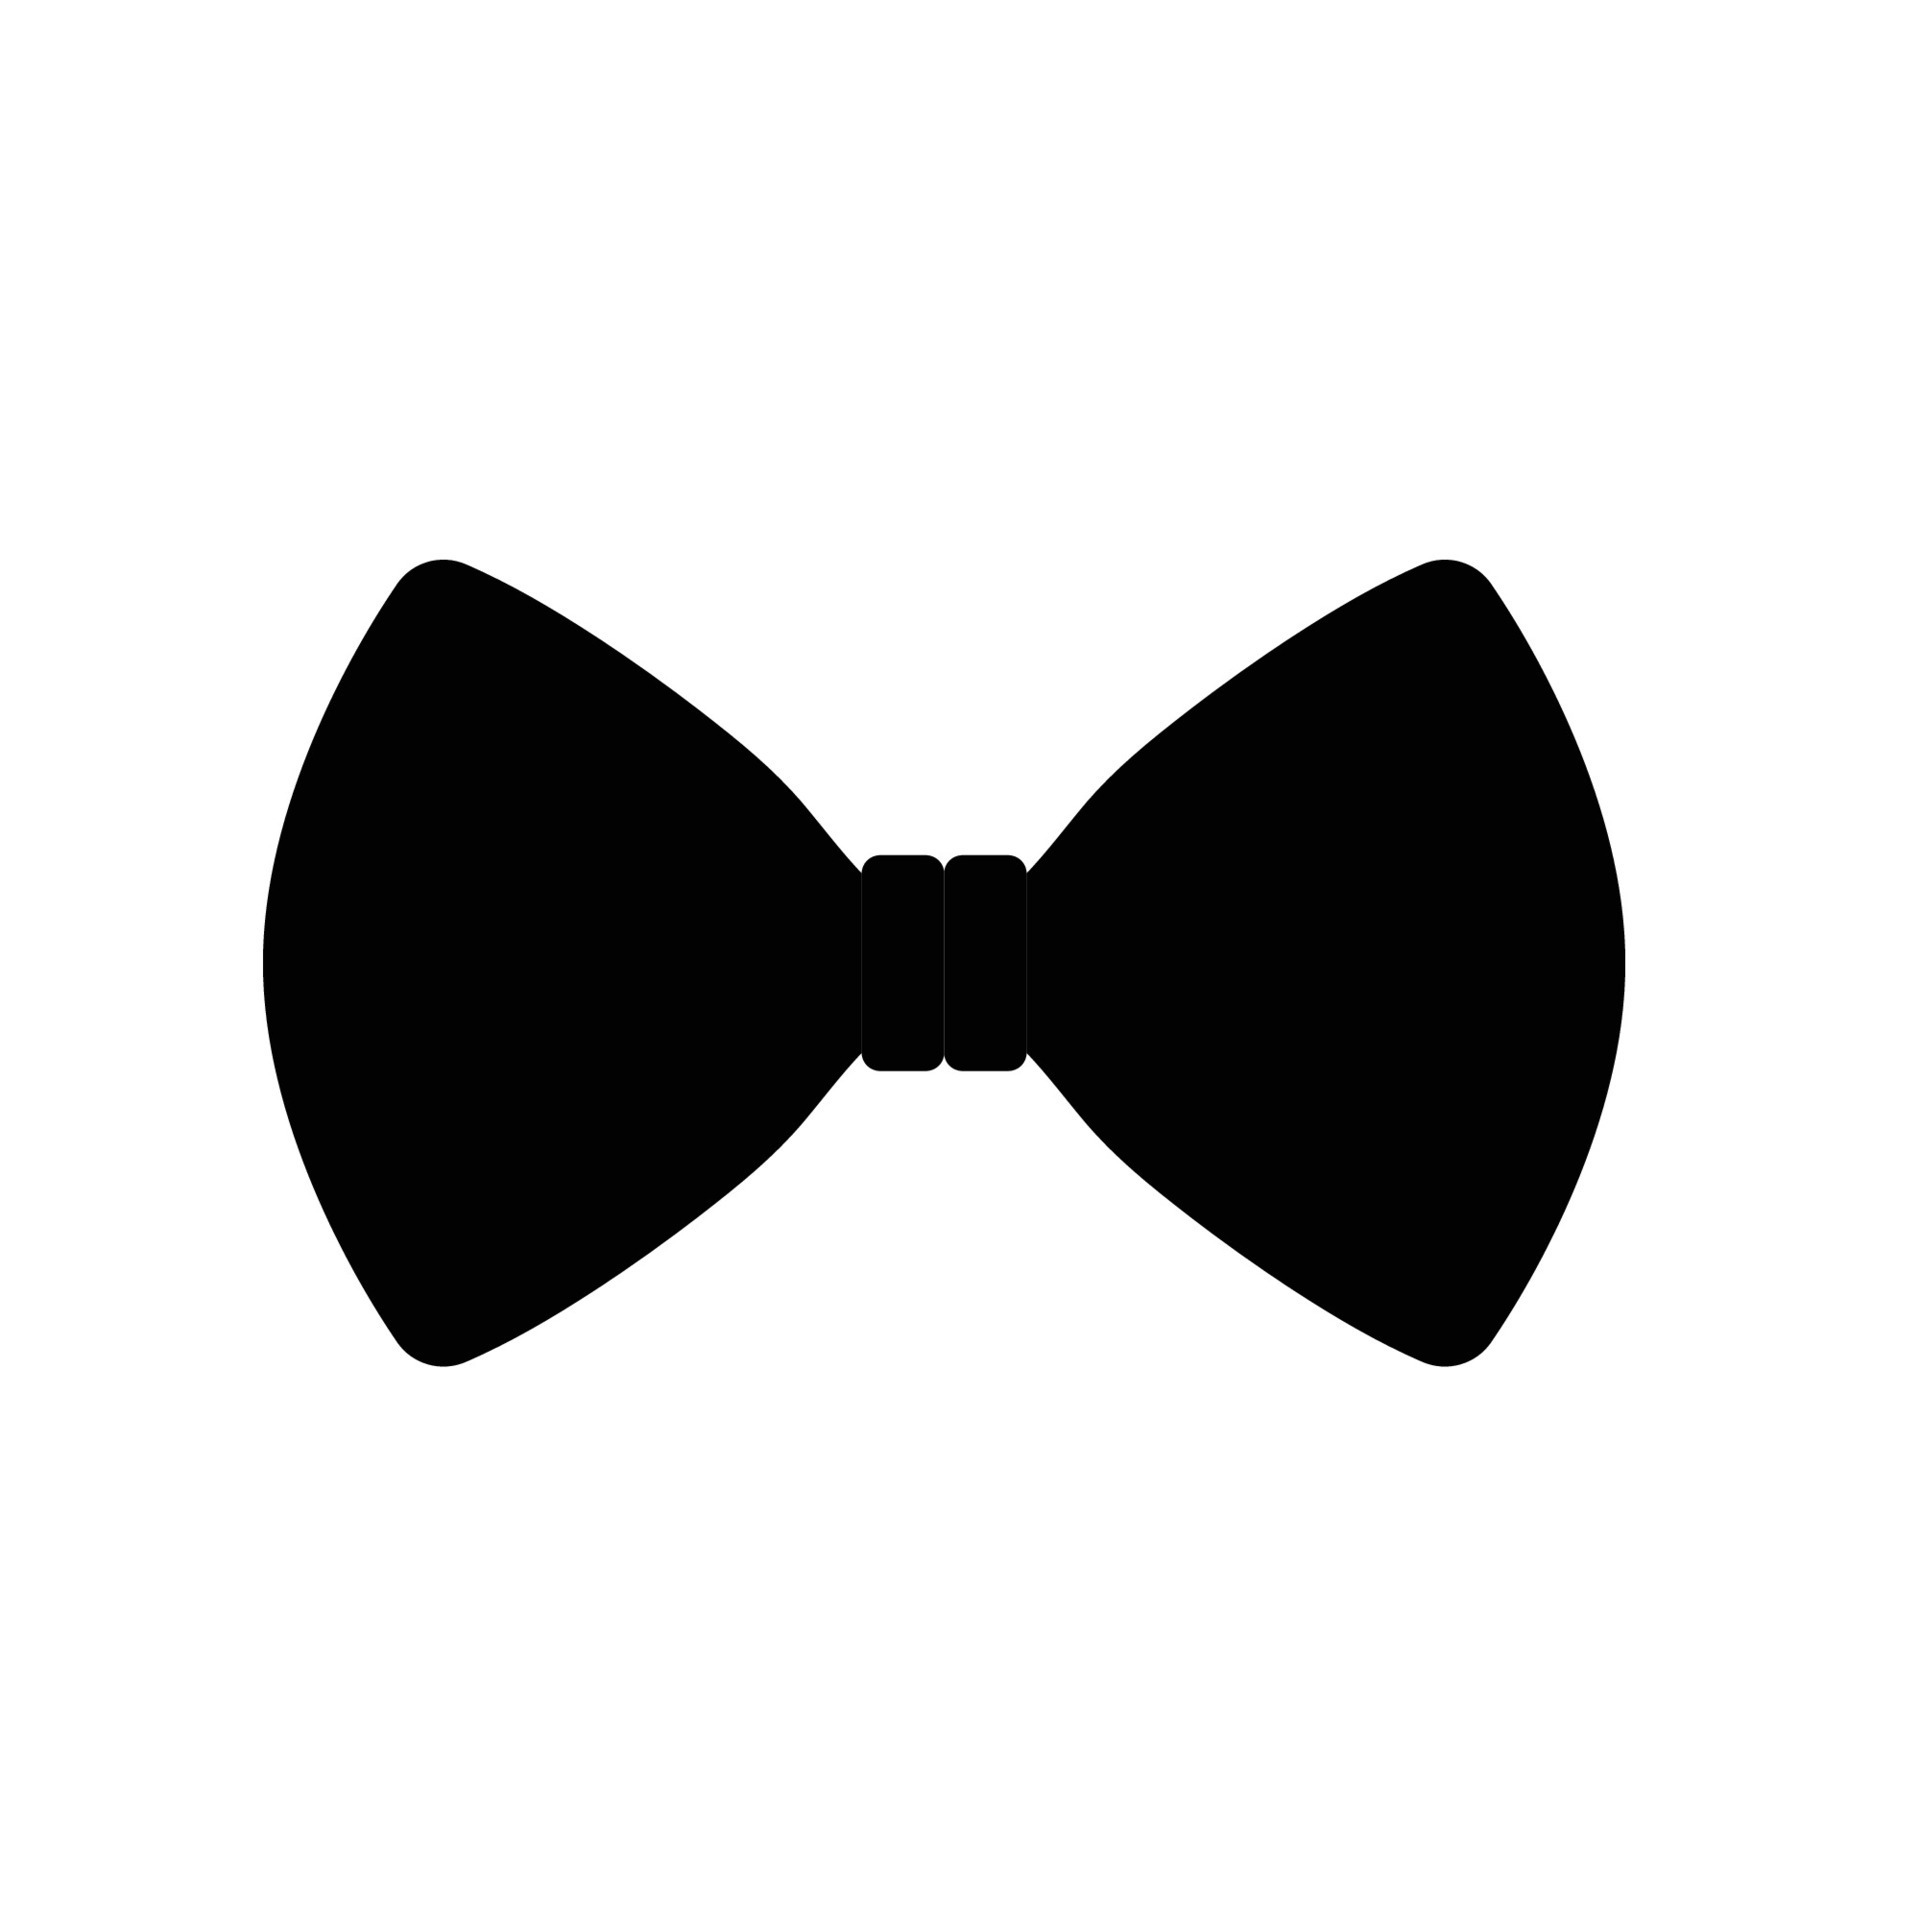 Bow Tie Silhouette. Black and White Icon Design Elements on Isolated ...